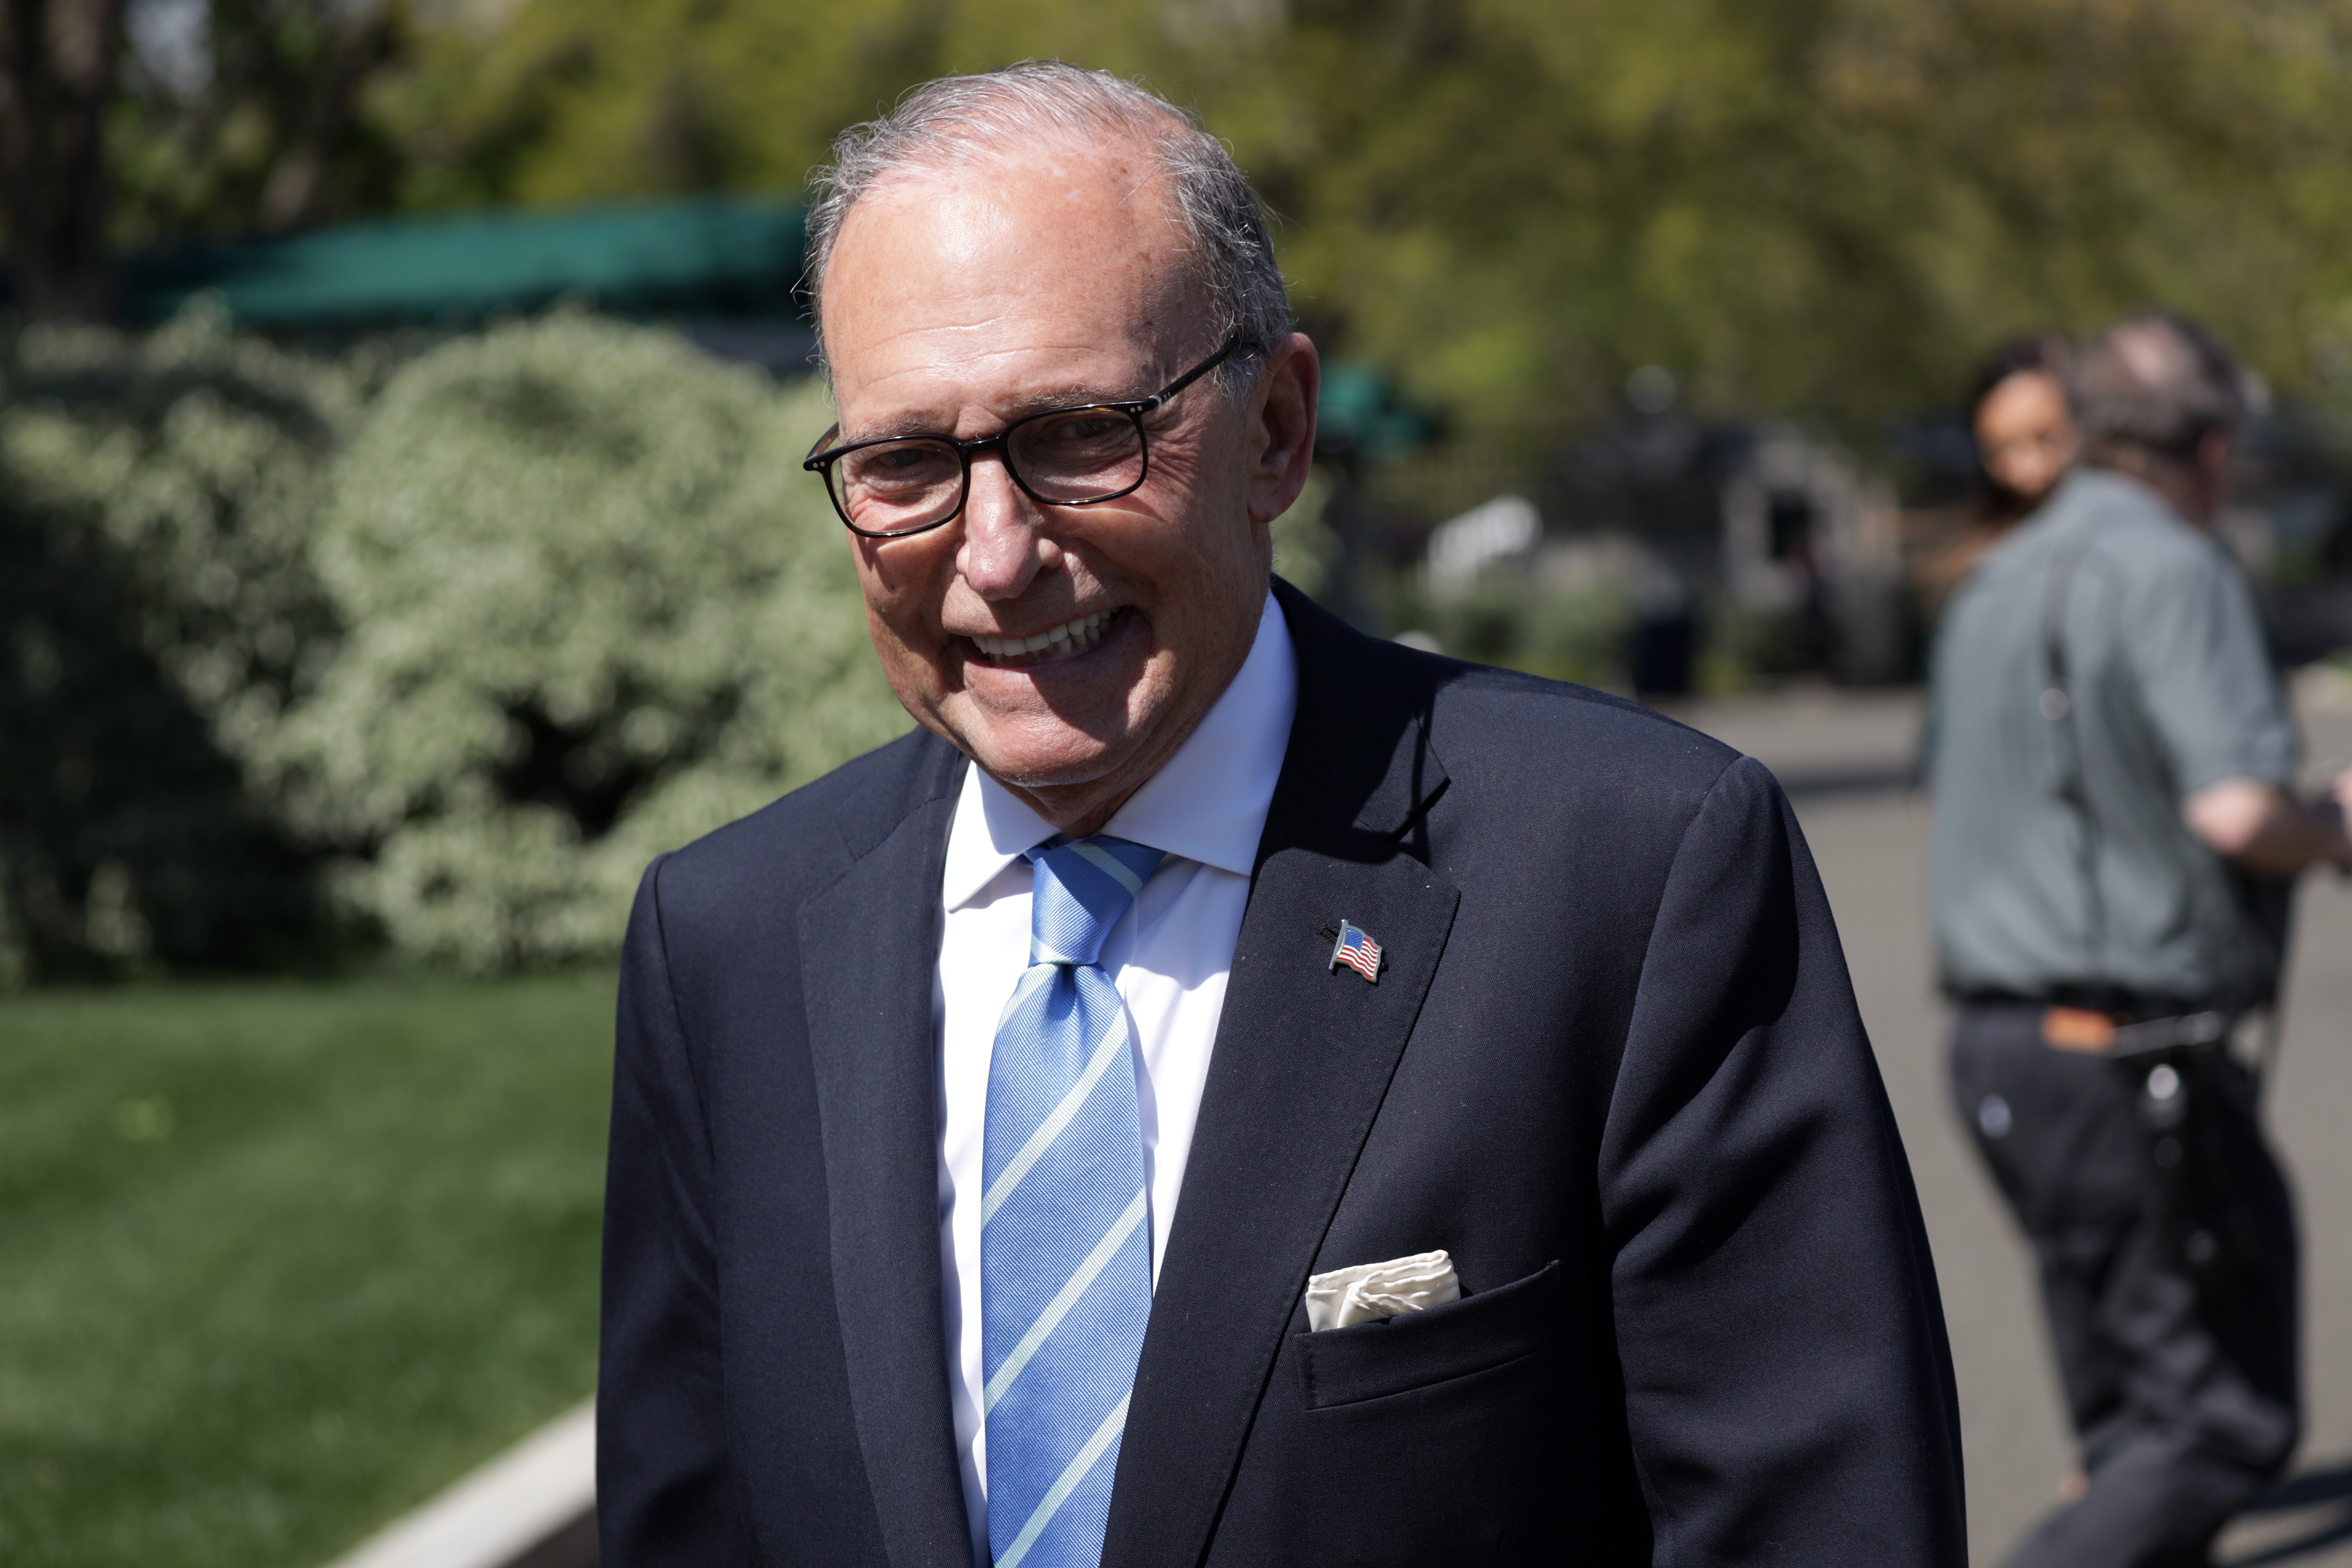 WASHINGTON, DC - APRIL 09: Director of National Economic Council Larry Kudlow walks towards the West Wing of the White House after giving TV interviews on April 09, 2020 in Washington, DC. The White House Coronavirus Task Force is scheduled to give a daily briefing at 5pm today. (Photo by Alex Wong/Getty Images)